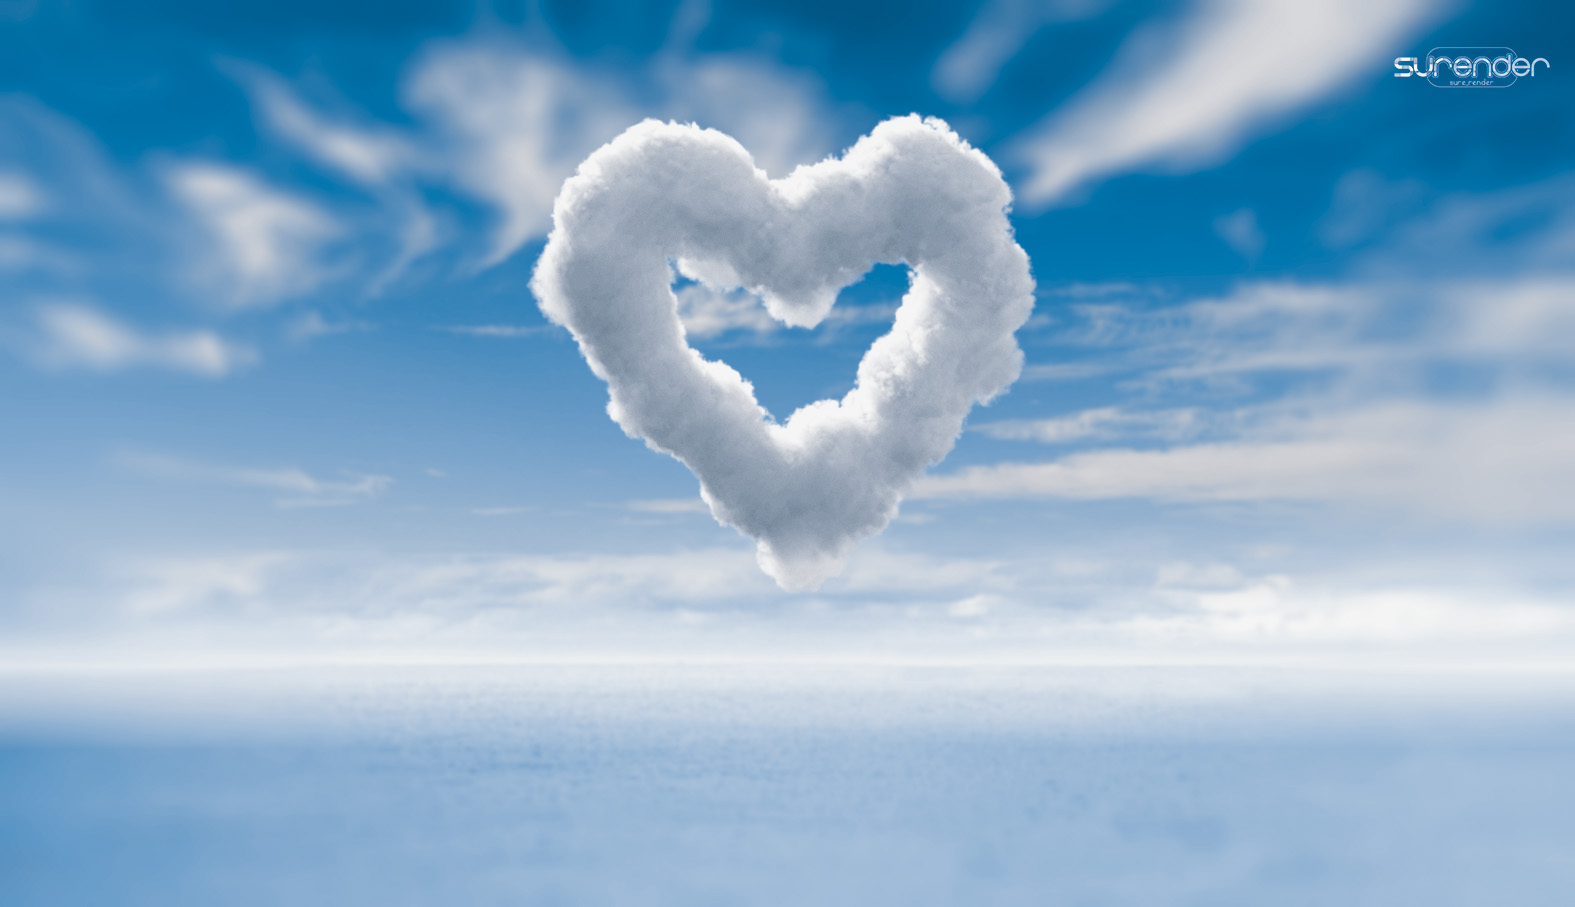  Day   Heart shaped cloud wallpapers   ART FOR YOUR WALLPAPER